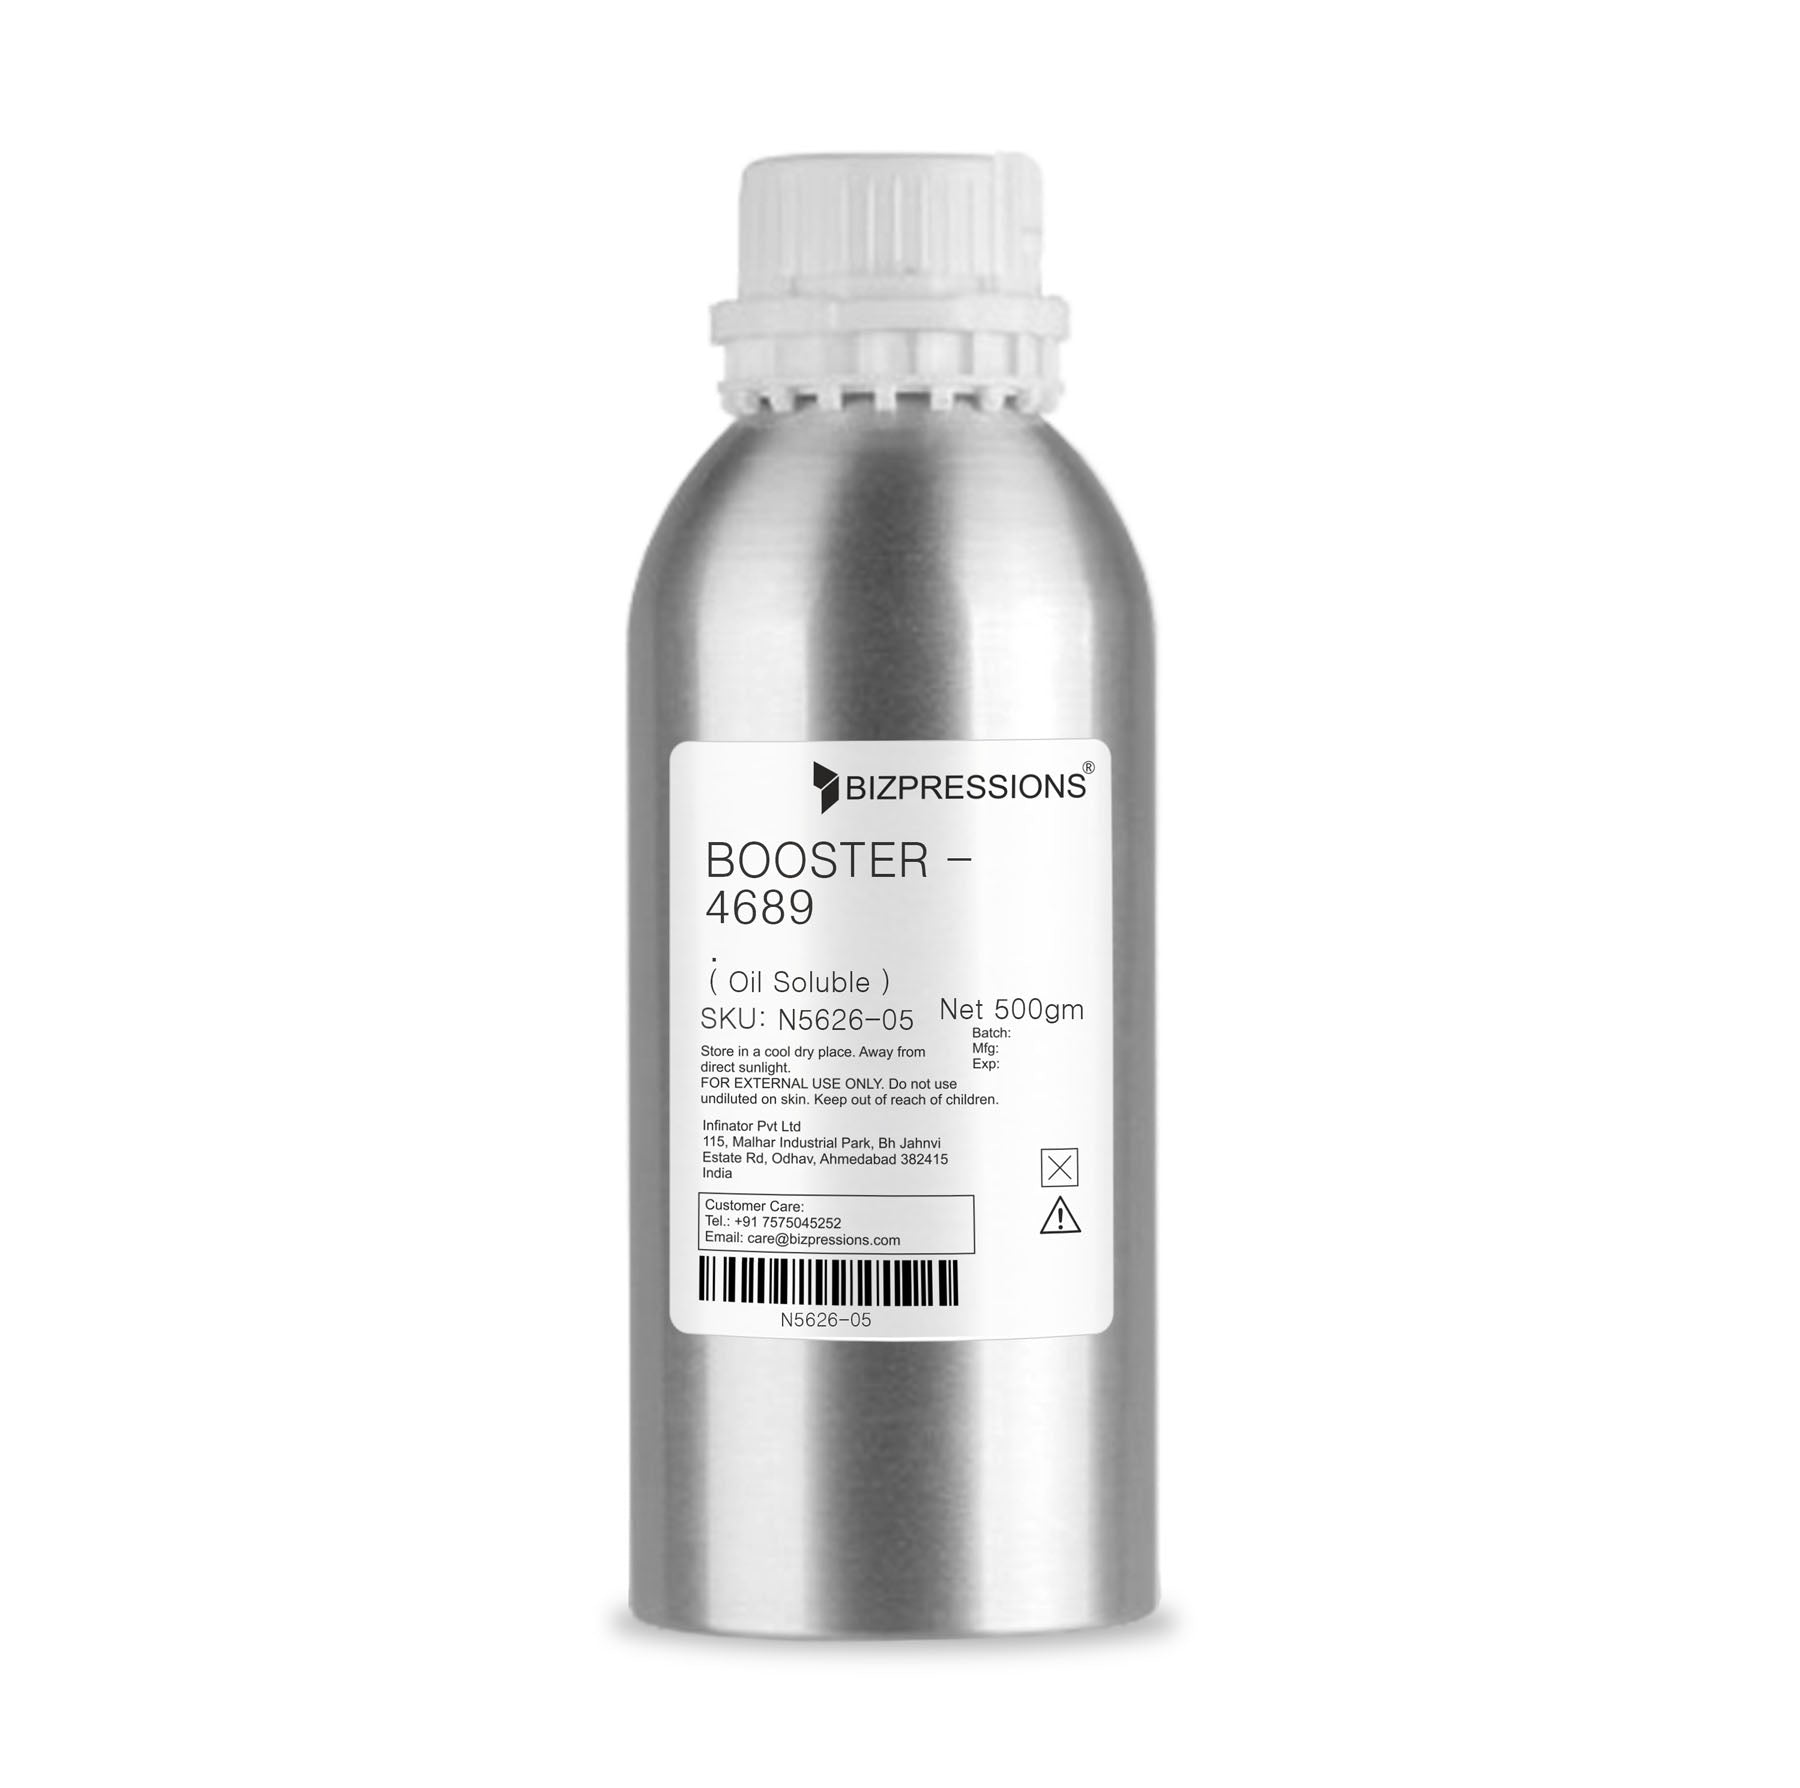 BOOSTER - 4689 - Fragrance ( Oil Soluble ) - 500 gm